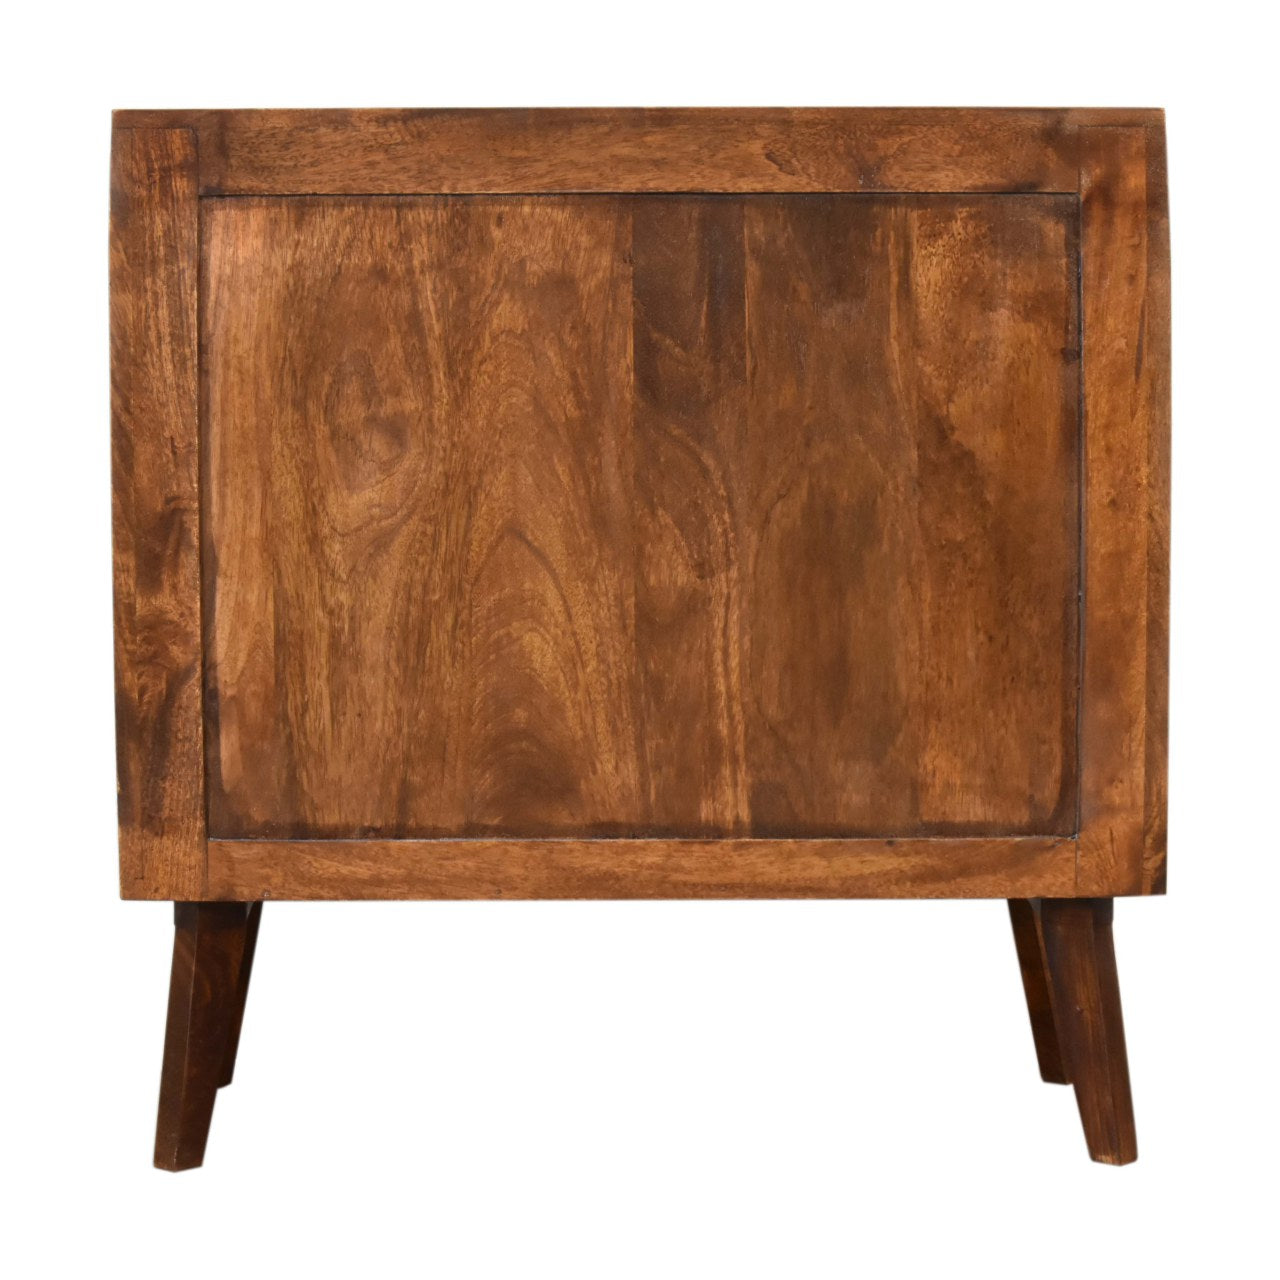 Woven Rattan Front Solid Wood Chest Of Drawers In Chestnut Finish